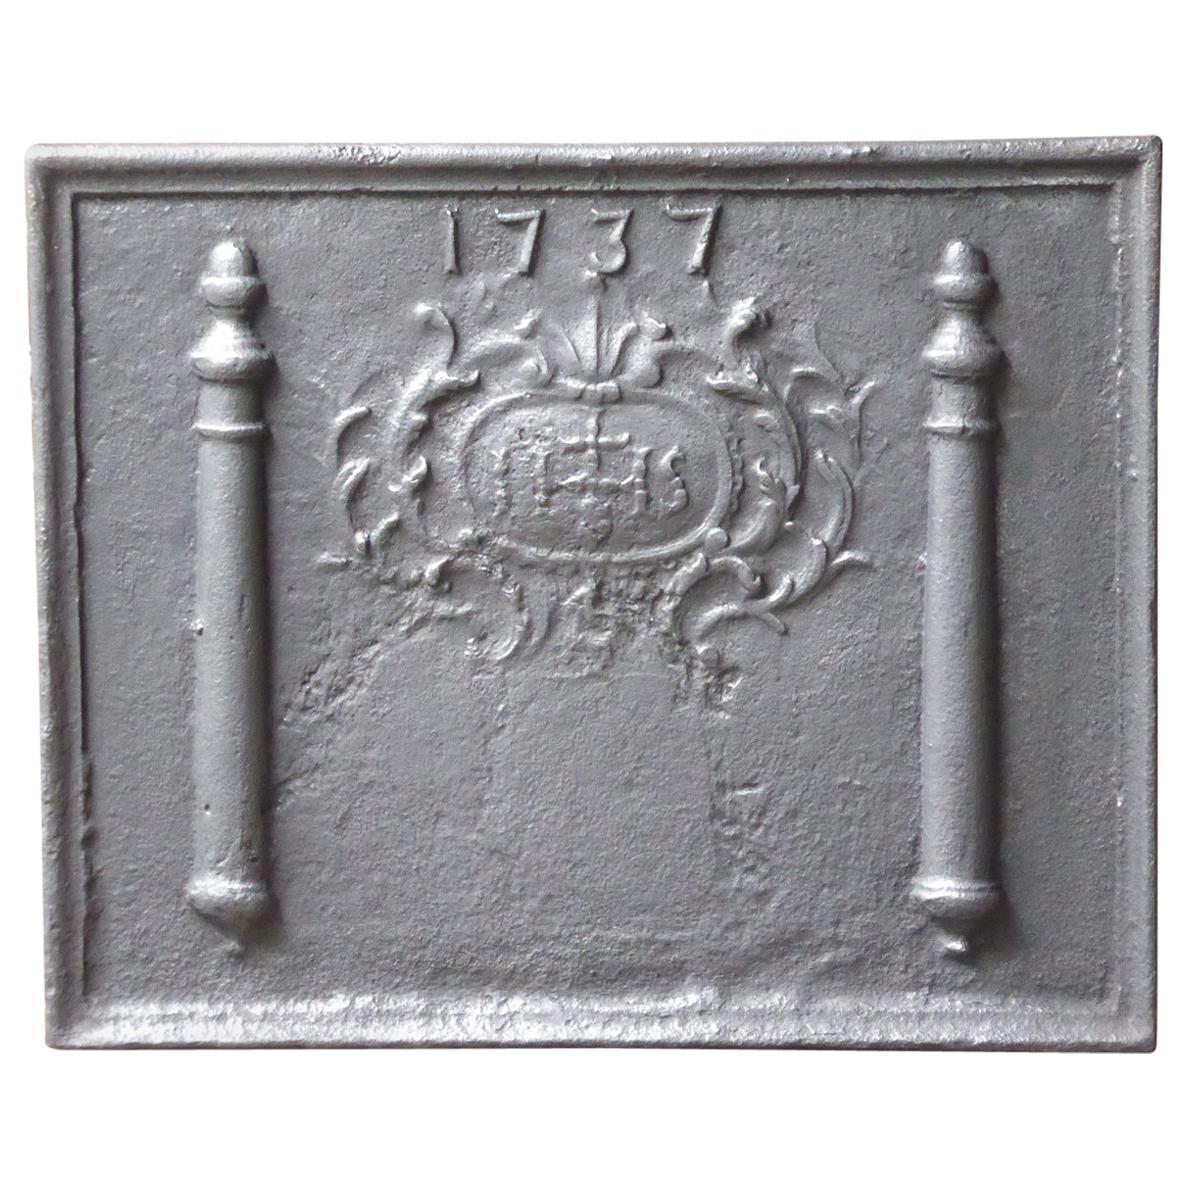 Antique Fireback with Medieval IHS Monogram, Dated 1737